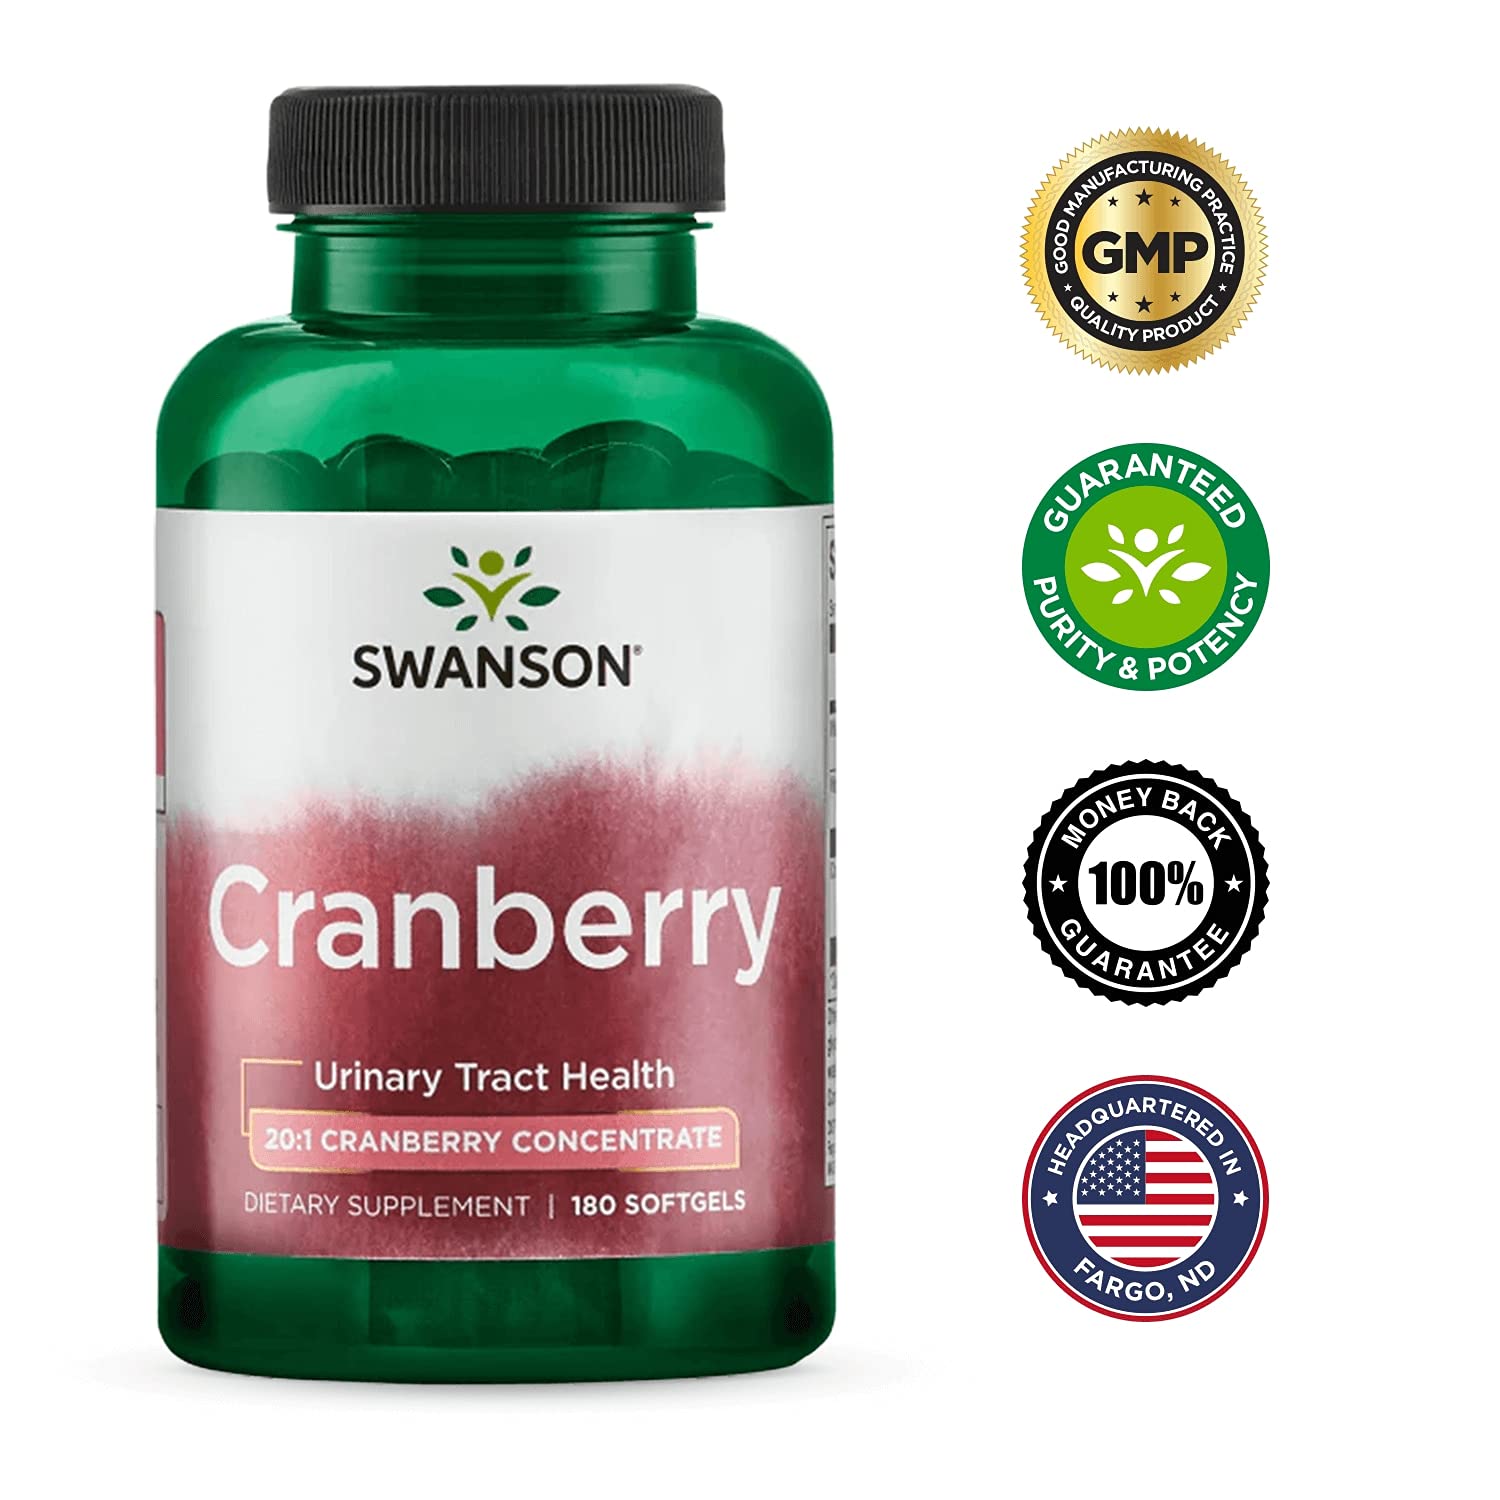 Cranberry Vitality Swanson's 20:1 Concentrated Supplement for Urinary Tract Health and Kidney Function (180 Softgels)